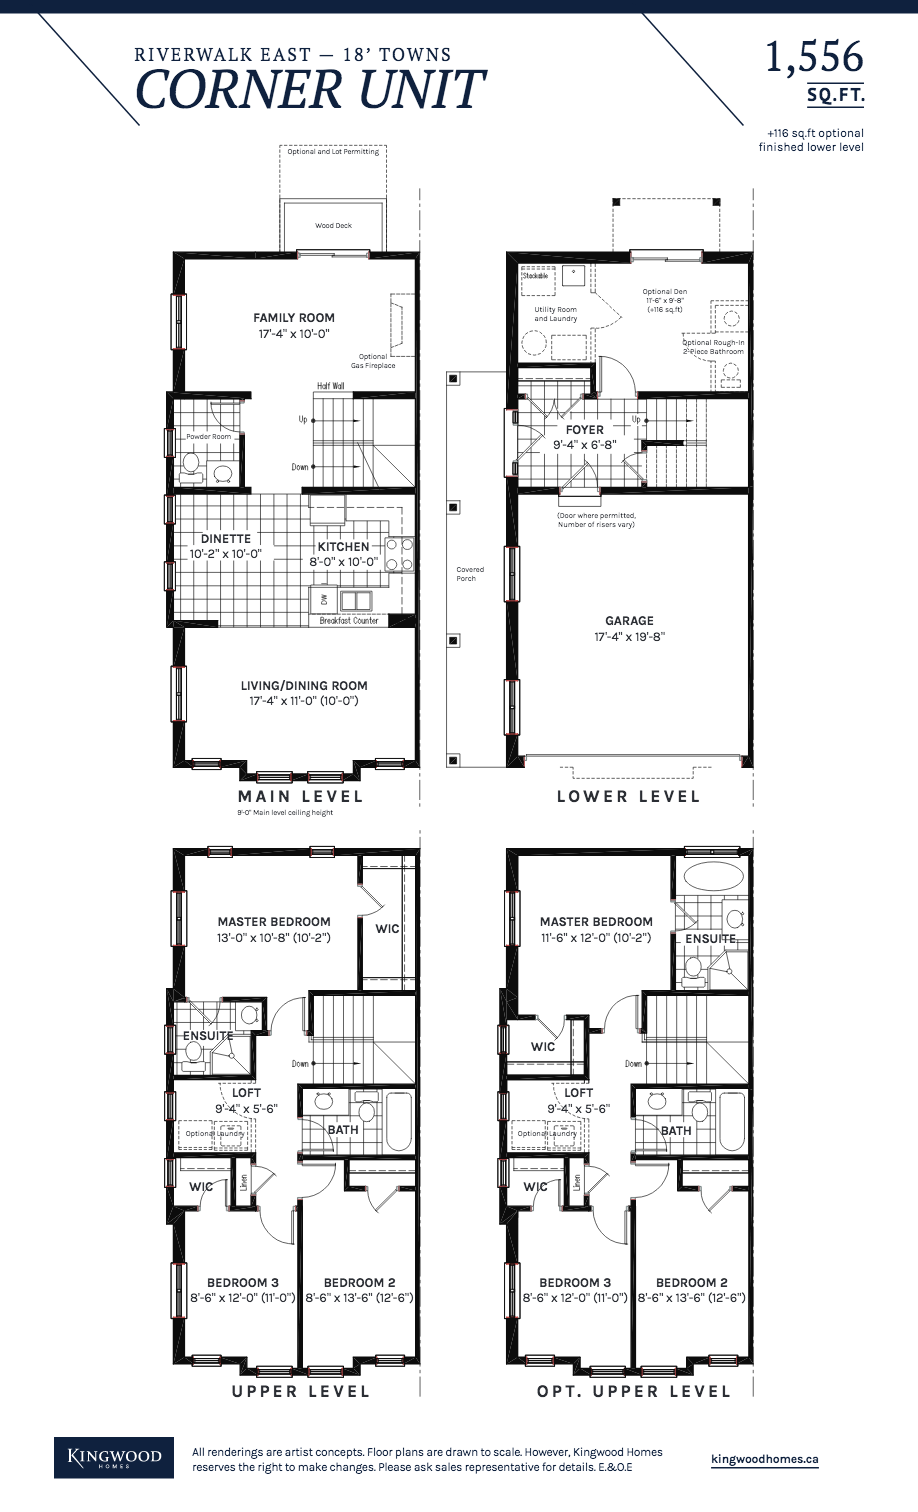  Corner Unit  Floor Plan of Riverwalk East Towns with undefined beds